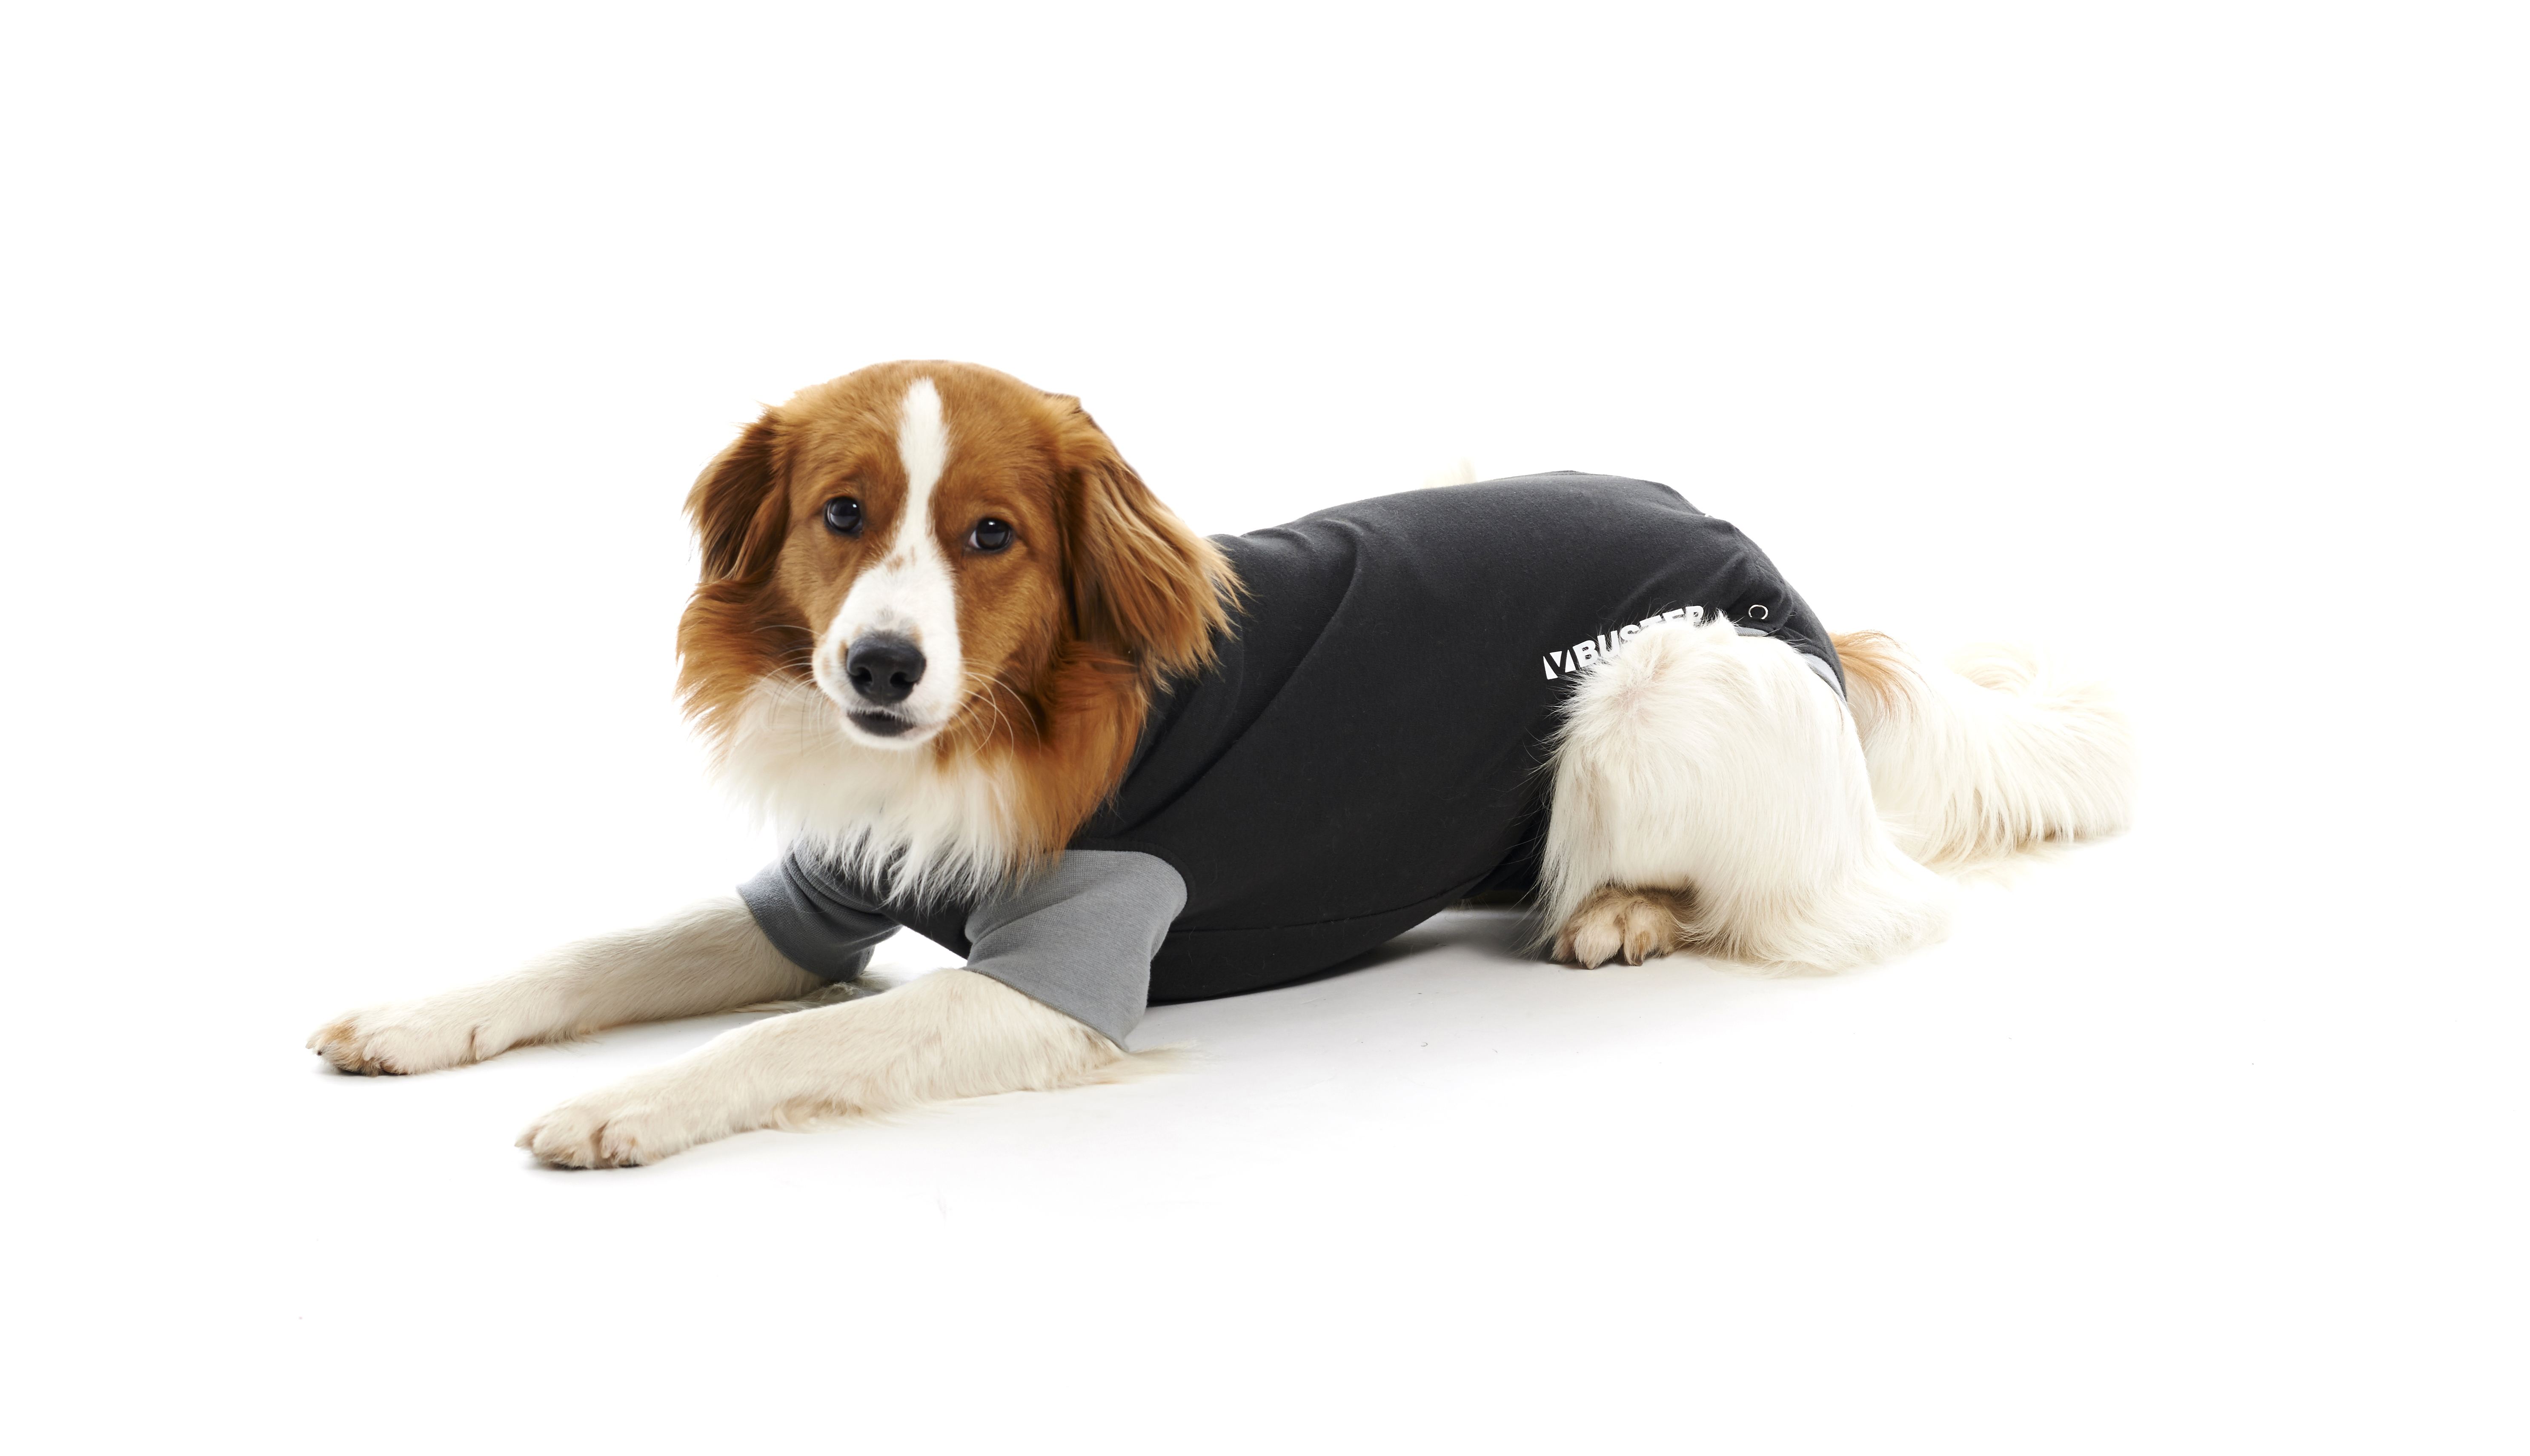 BUSTER Body Suit EasyGo for dogs, black/grey, 45 cm, size M